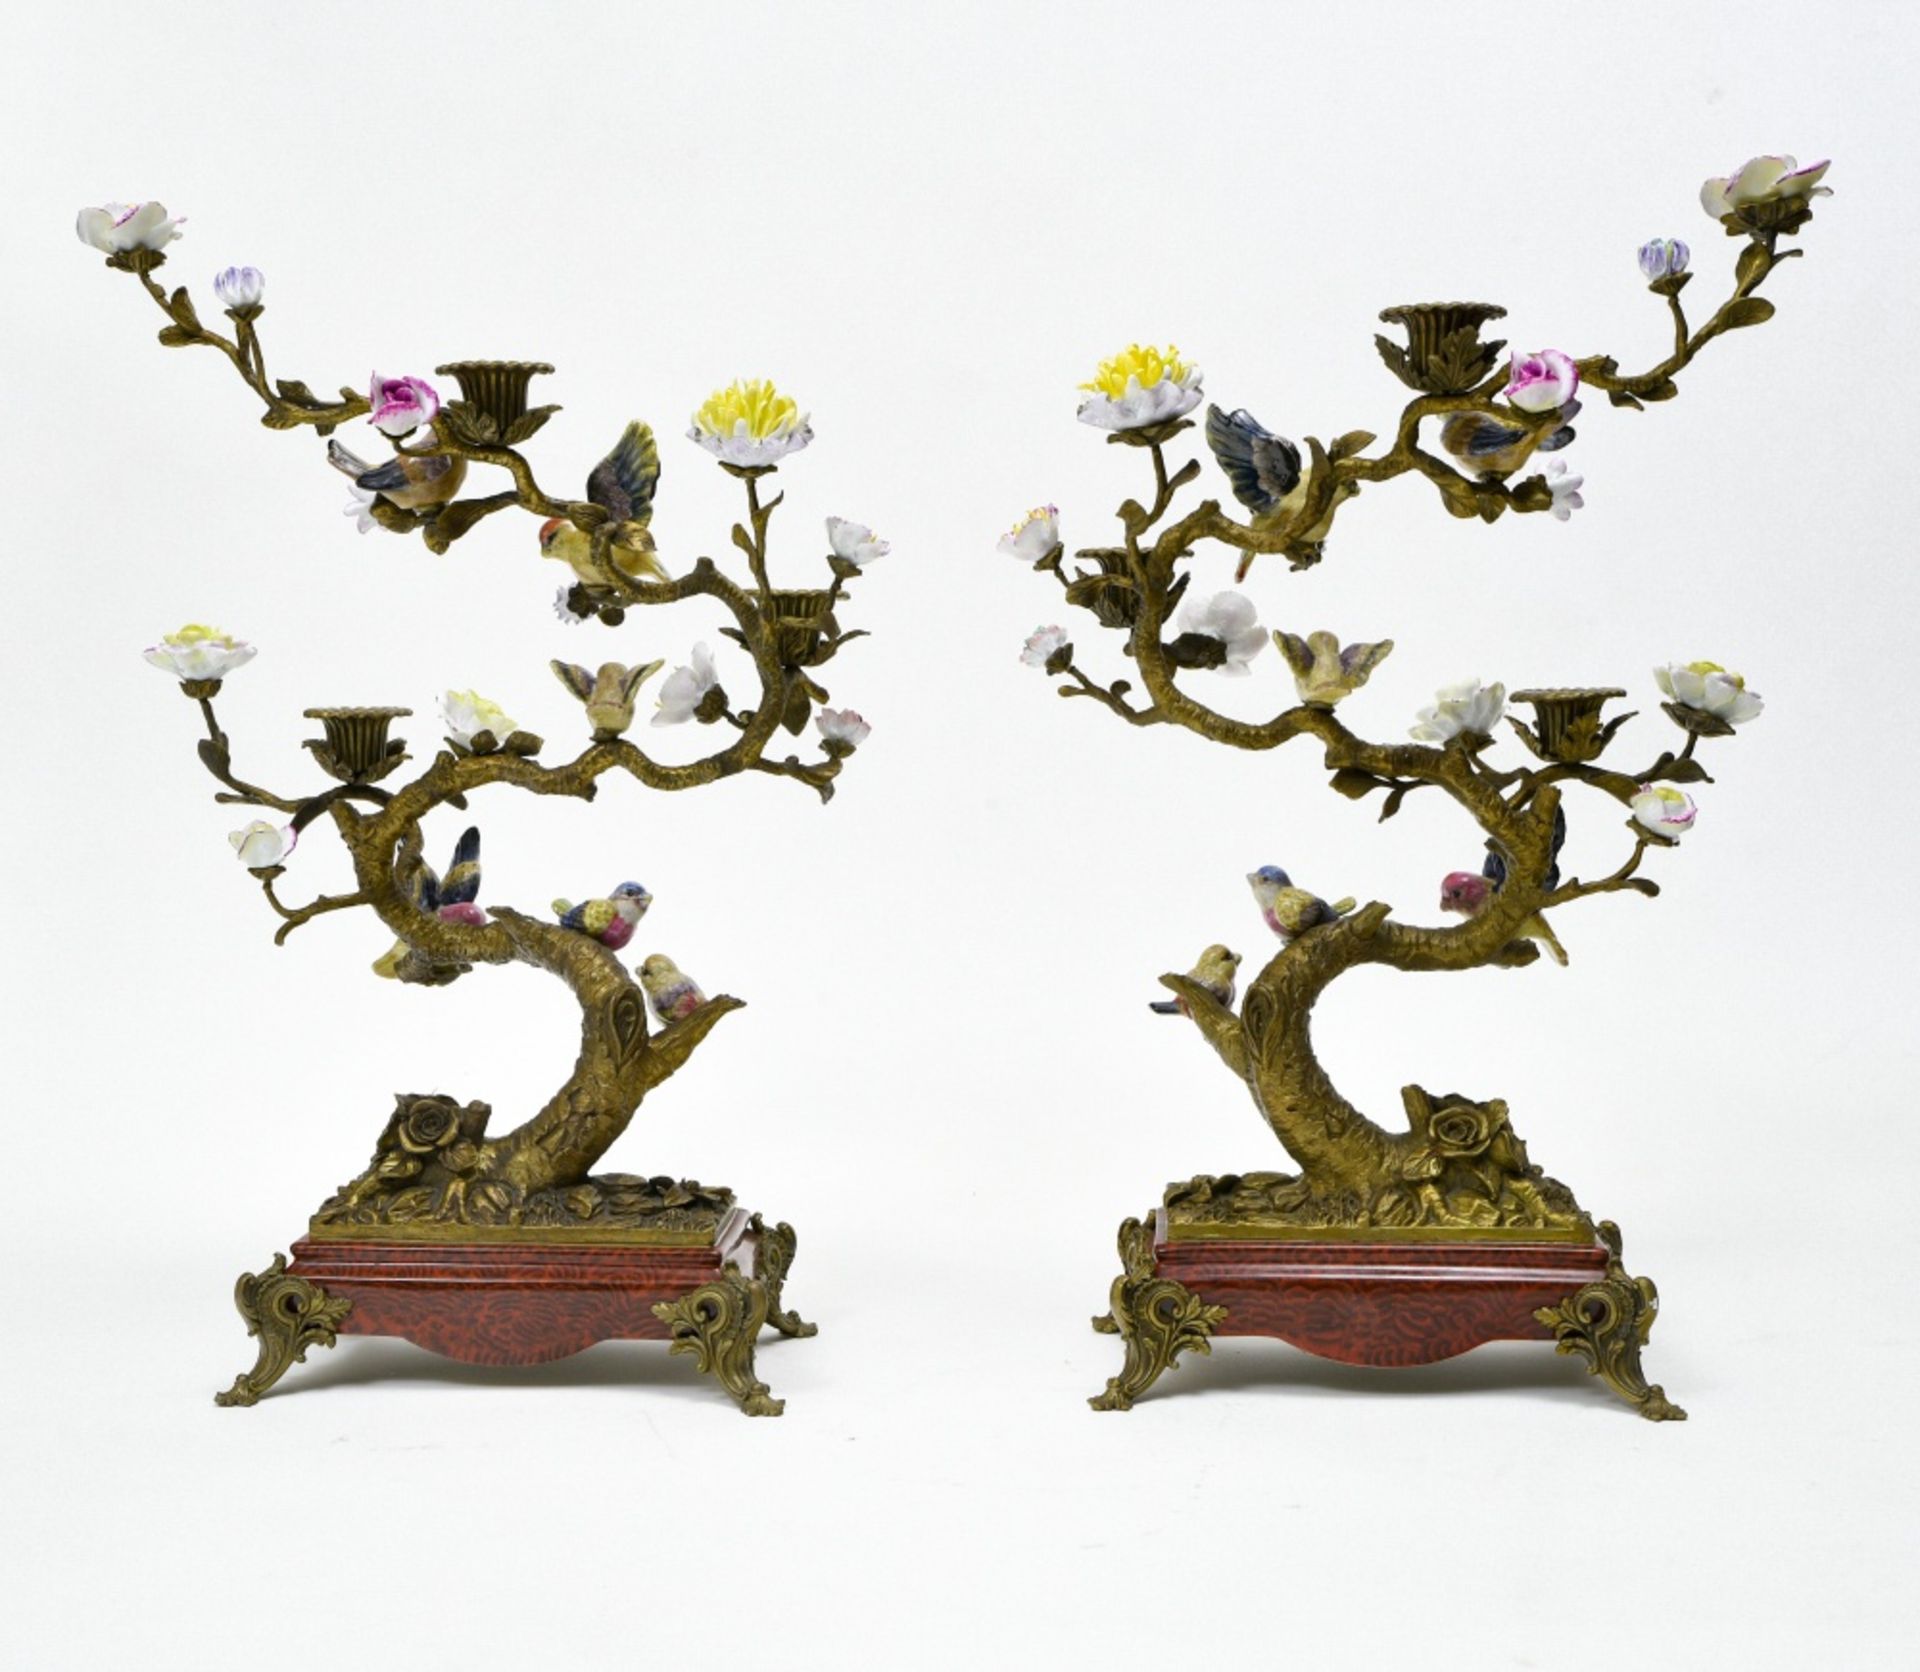 China, 20th century Pair of candelabras featuring birds, Bronze and porcelain. Mark under the base.